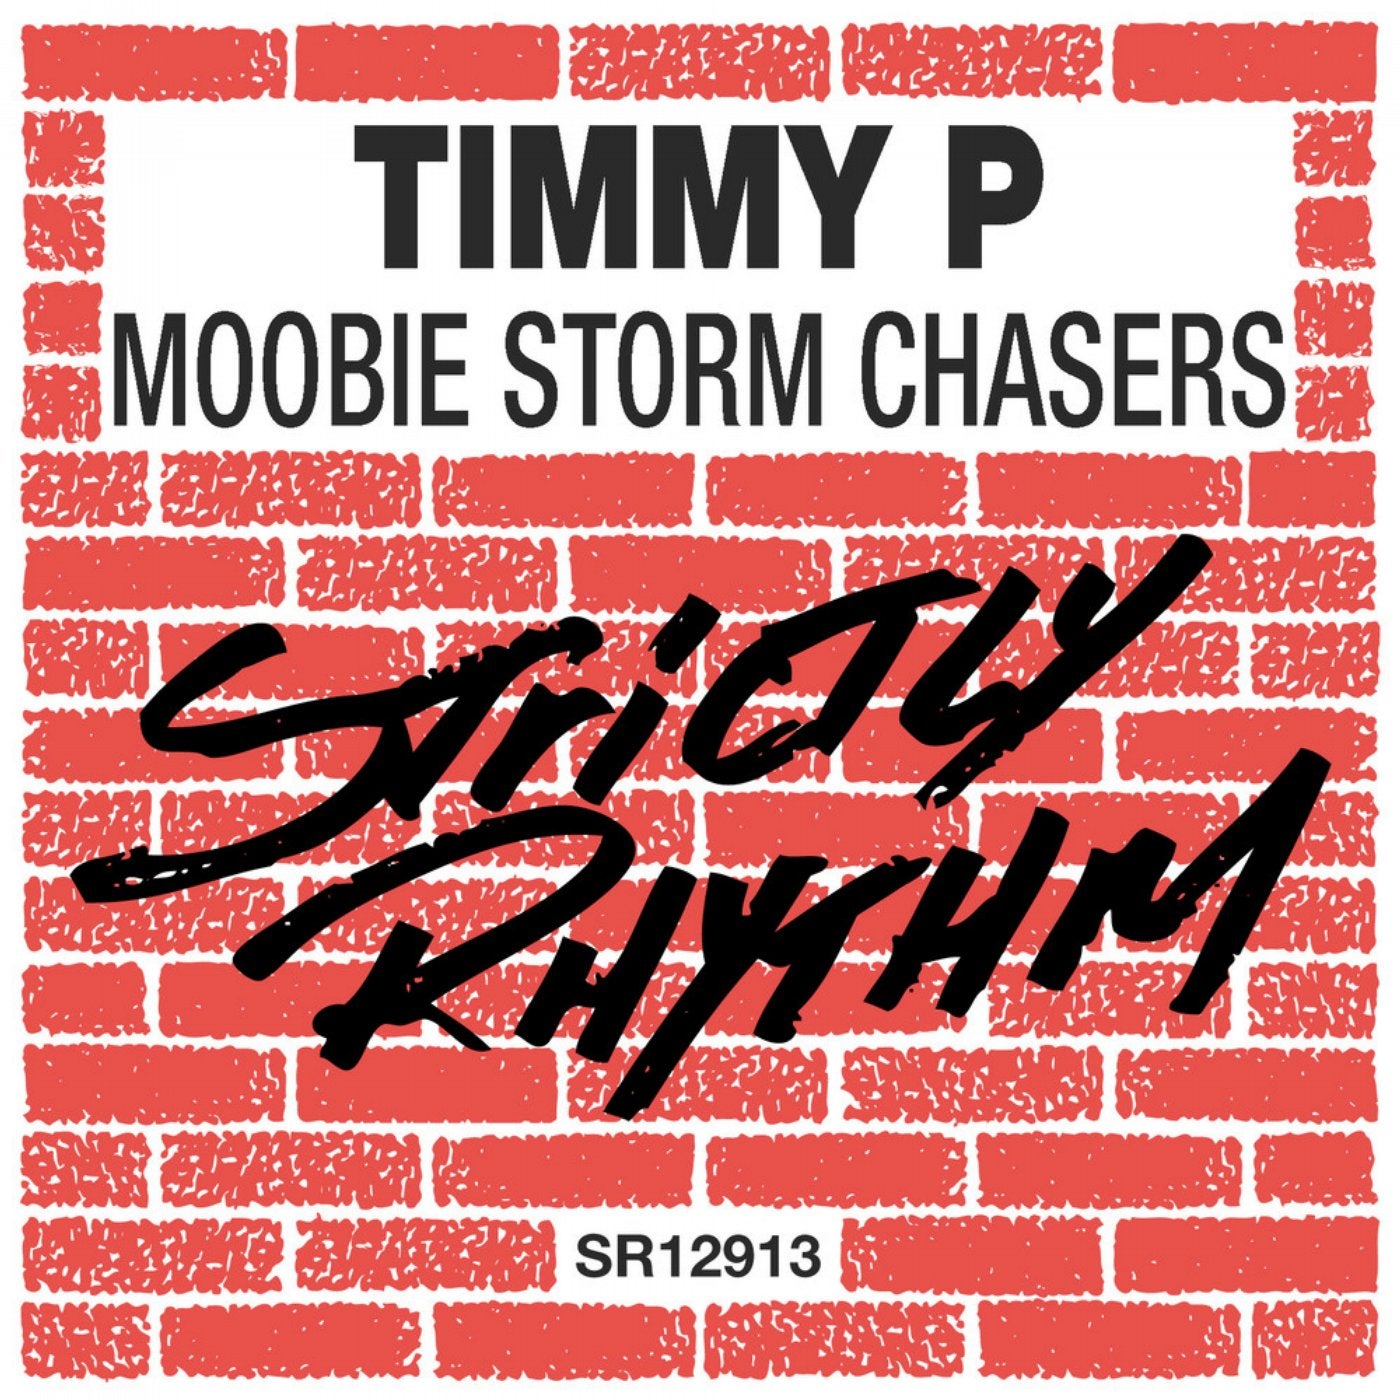 Moobie Storm Chasers